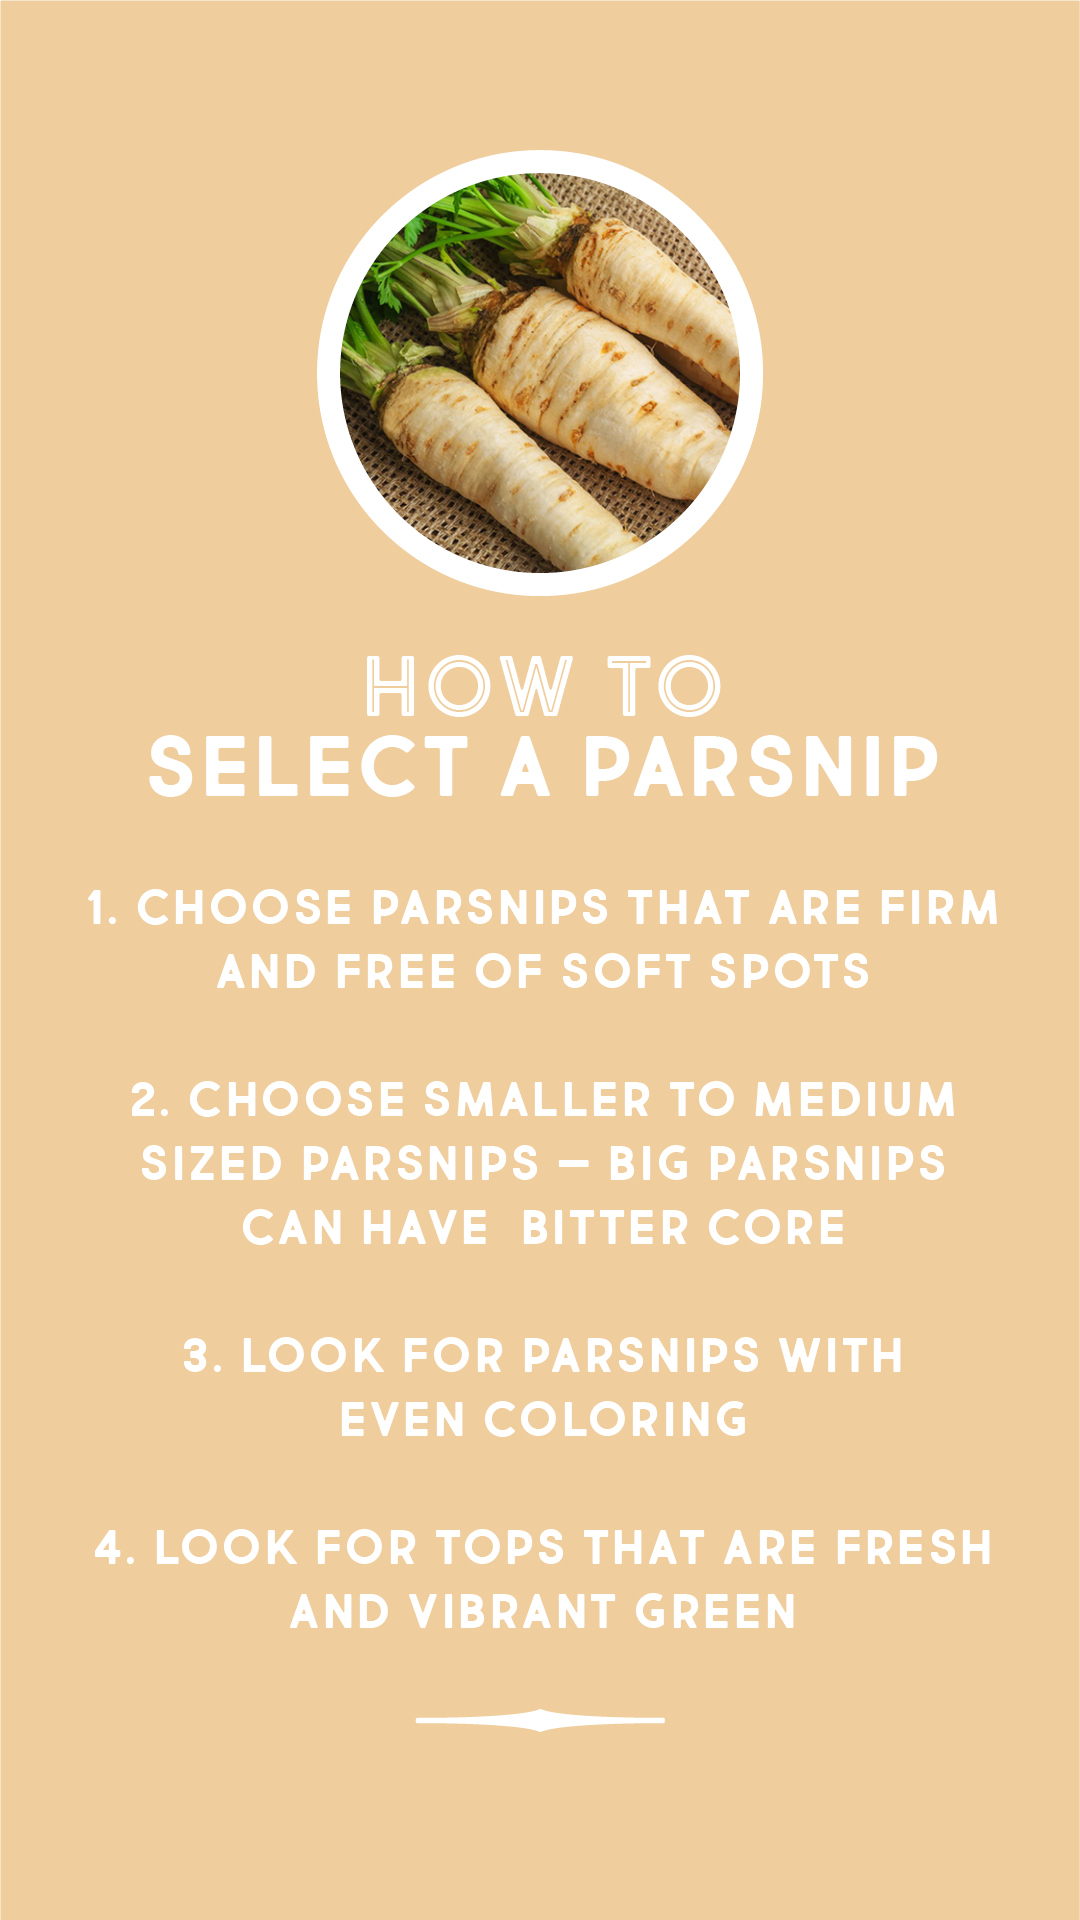 How to select a parsnip